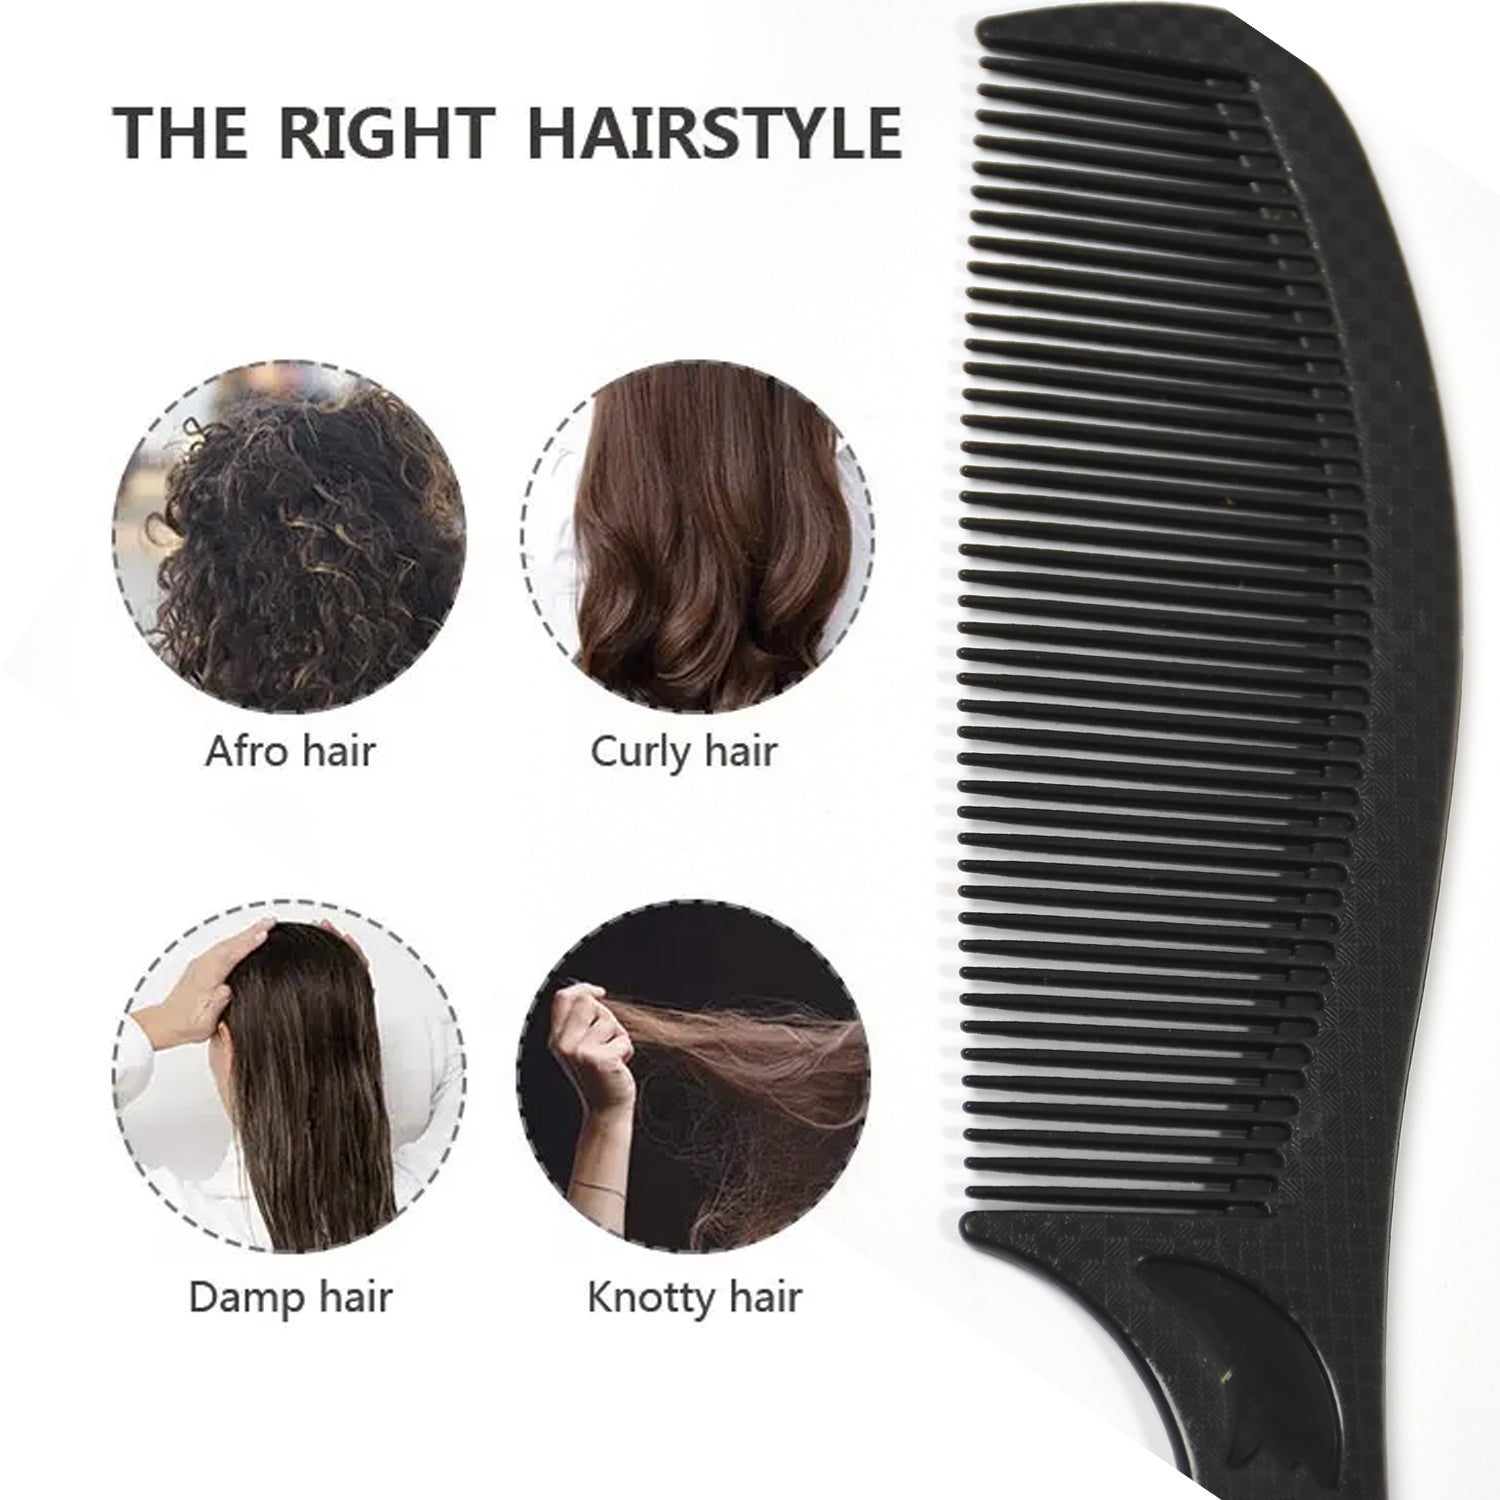 1404 Professional Hair Styling Salon Barber Combs for Hair Styling for Men Women and Kids Carbon Anti Static Comb DeoDap